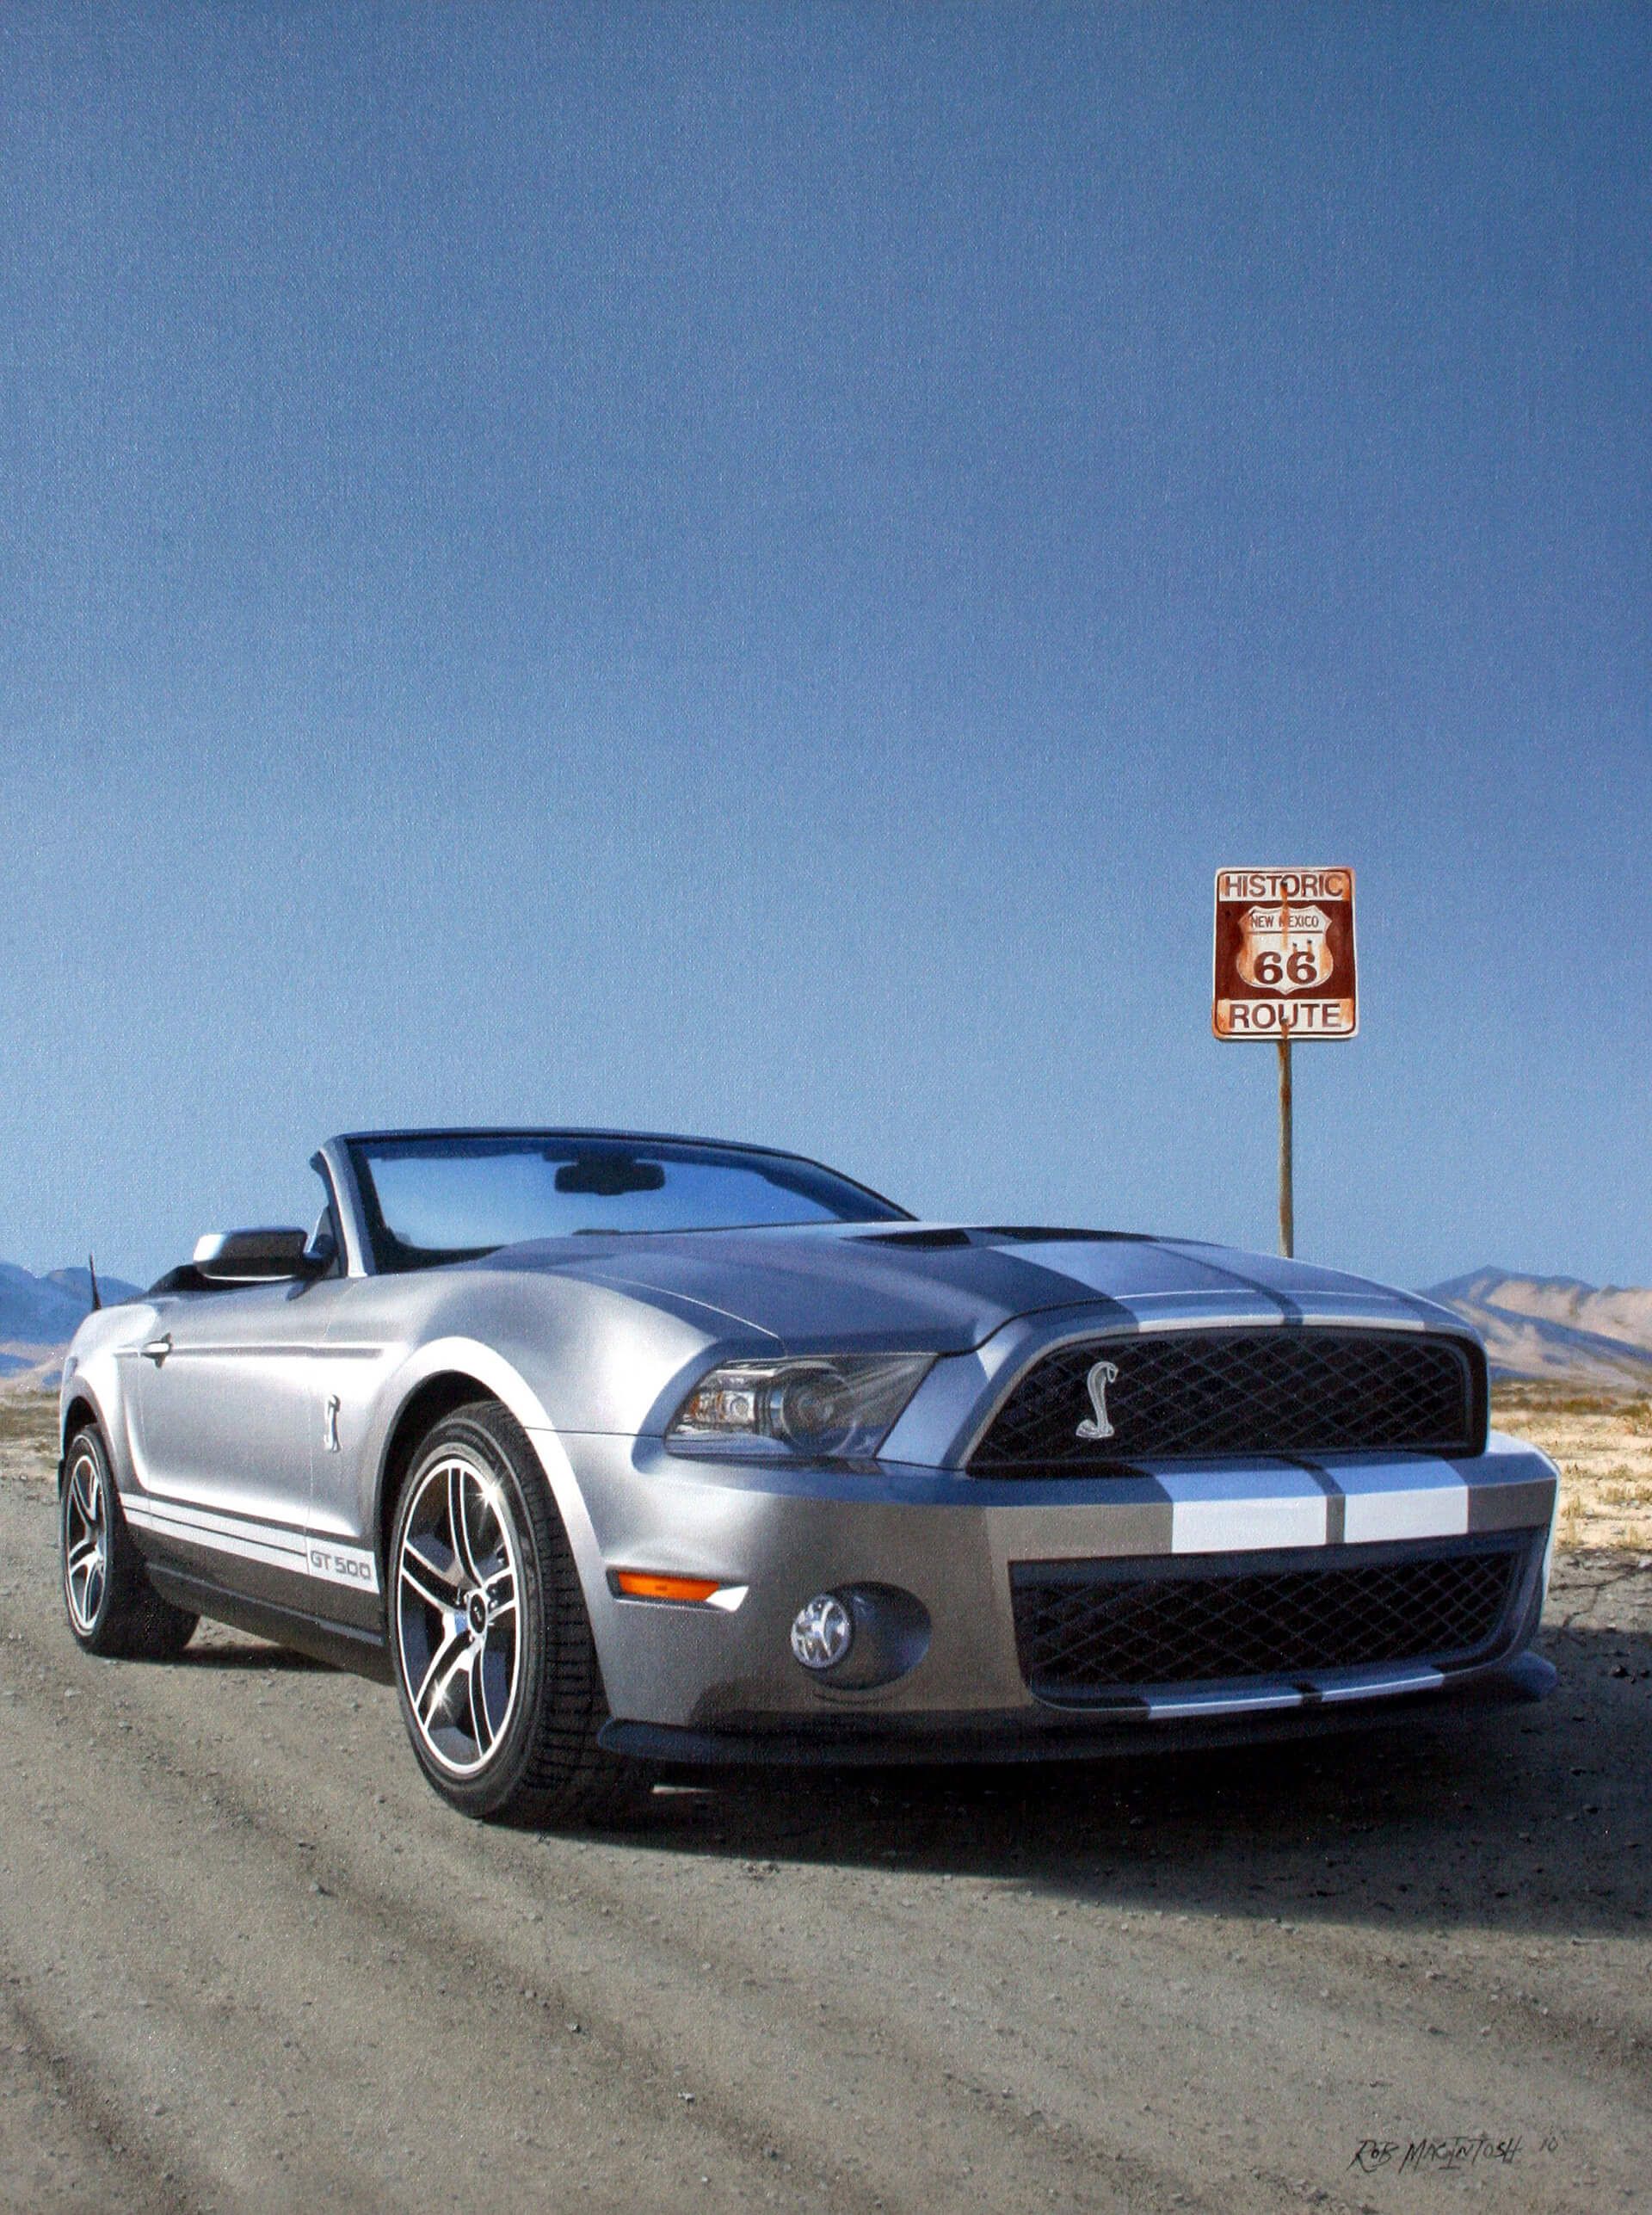 Photorealistic painting of a Shelby GT 500 on Route 66